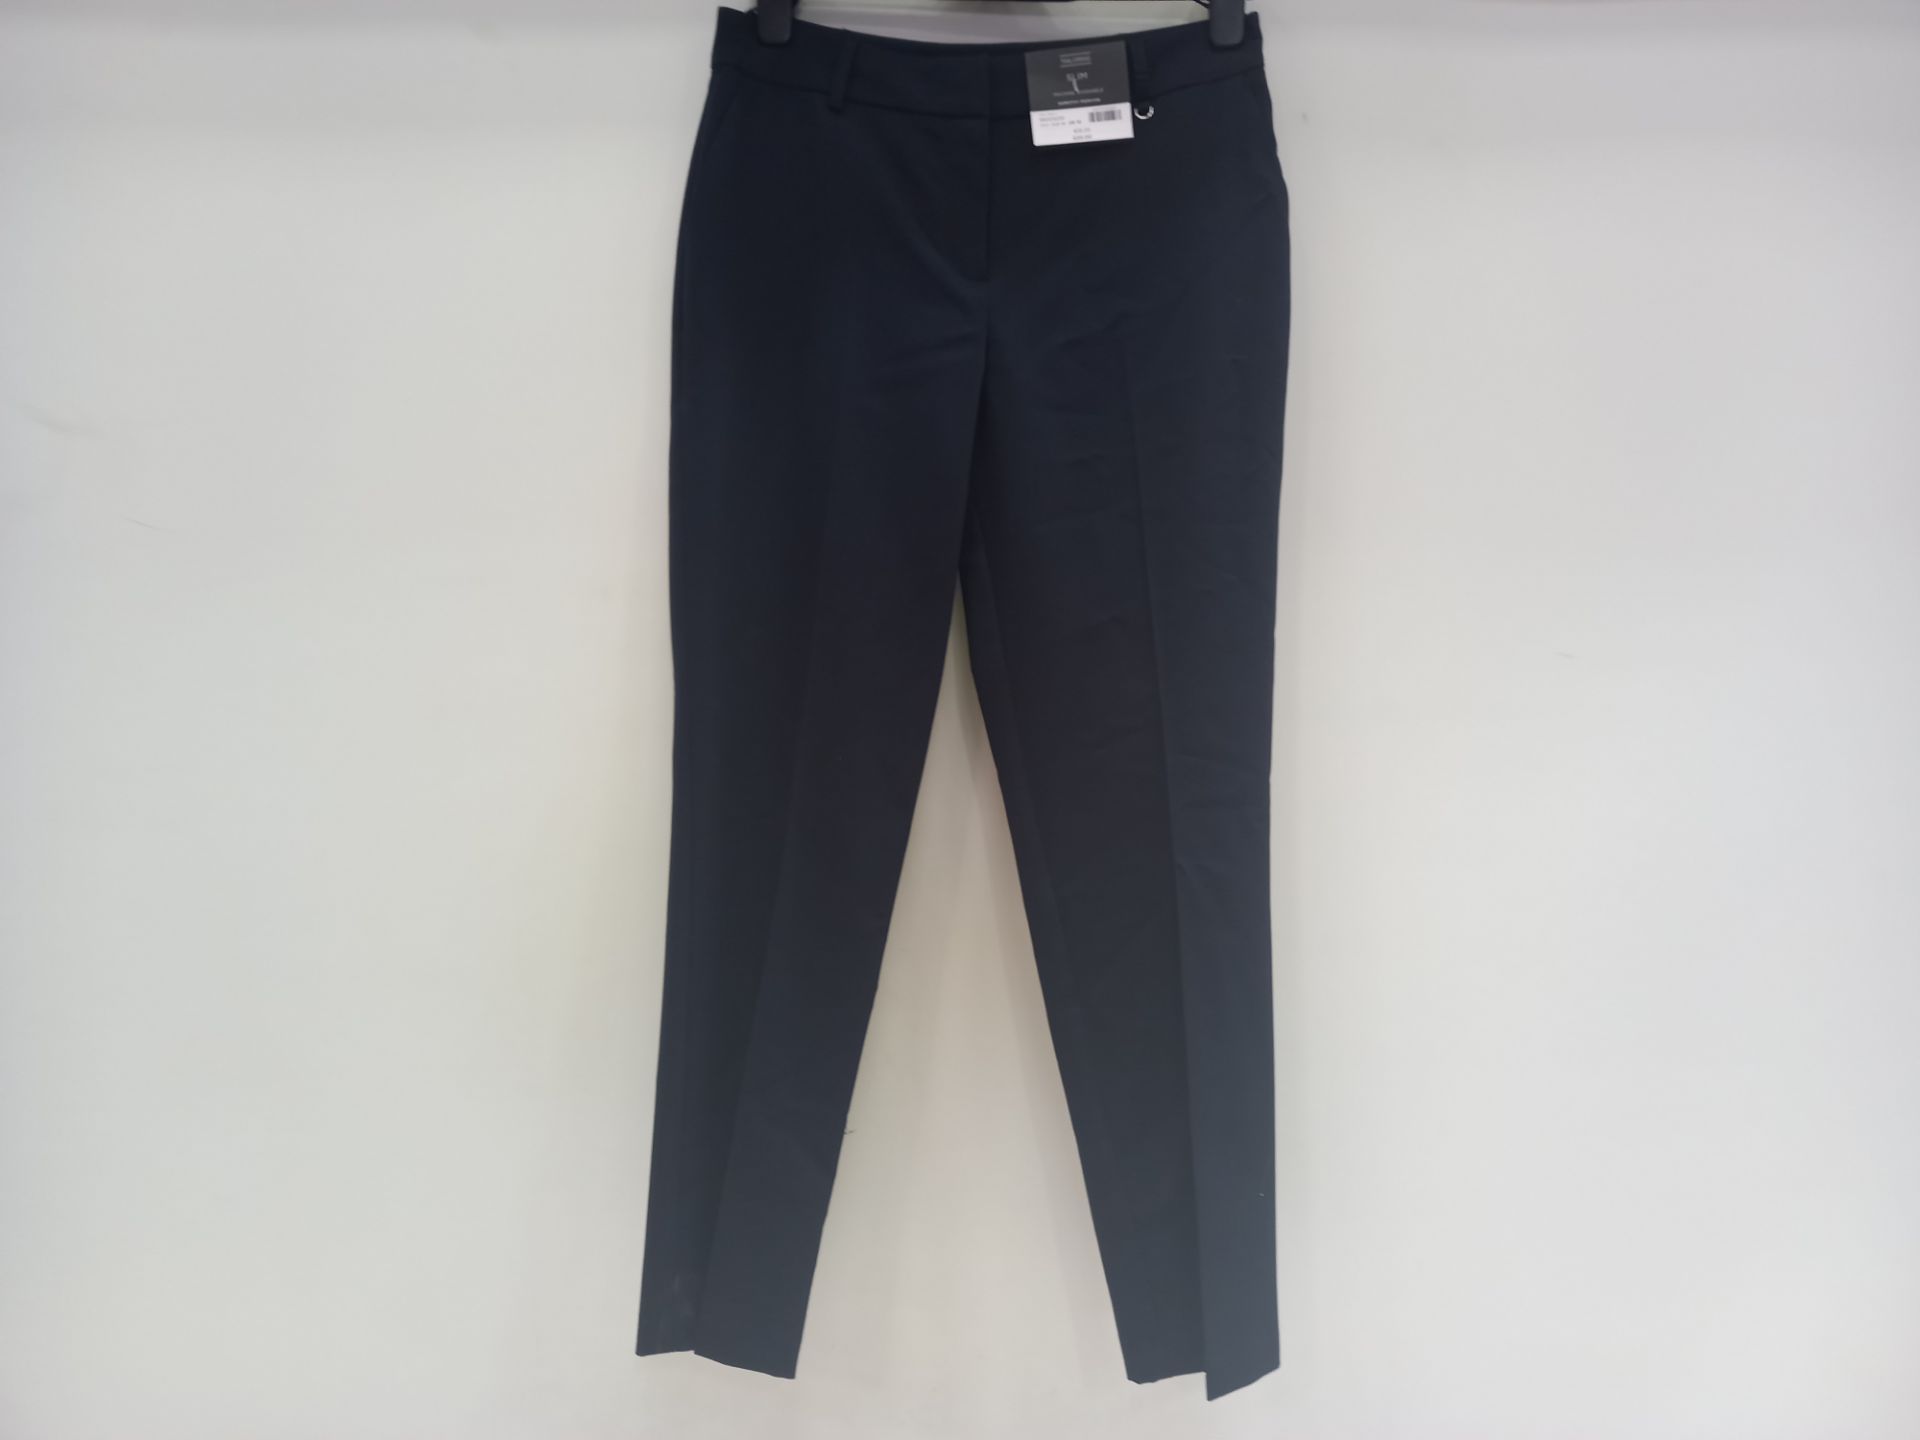 15 X BRAND NEW DOROTHY PERKINS SLIM FIT NAVY TROUSERS IN VARIOUS SIZES RRP £20.00 (TOTAL RRP £300.